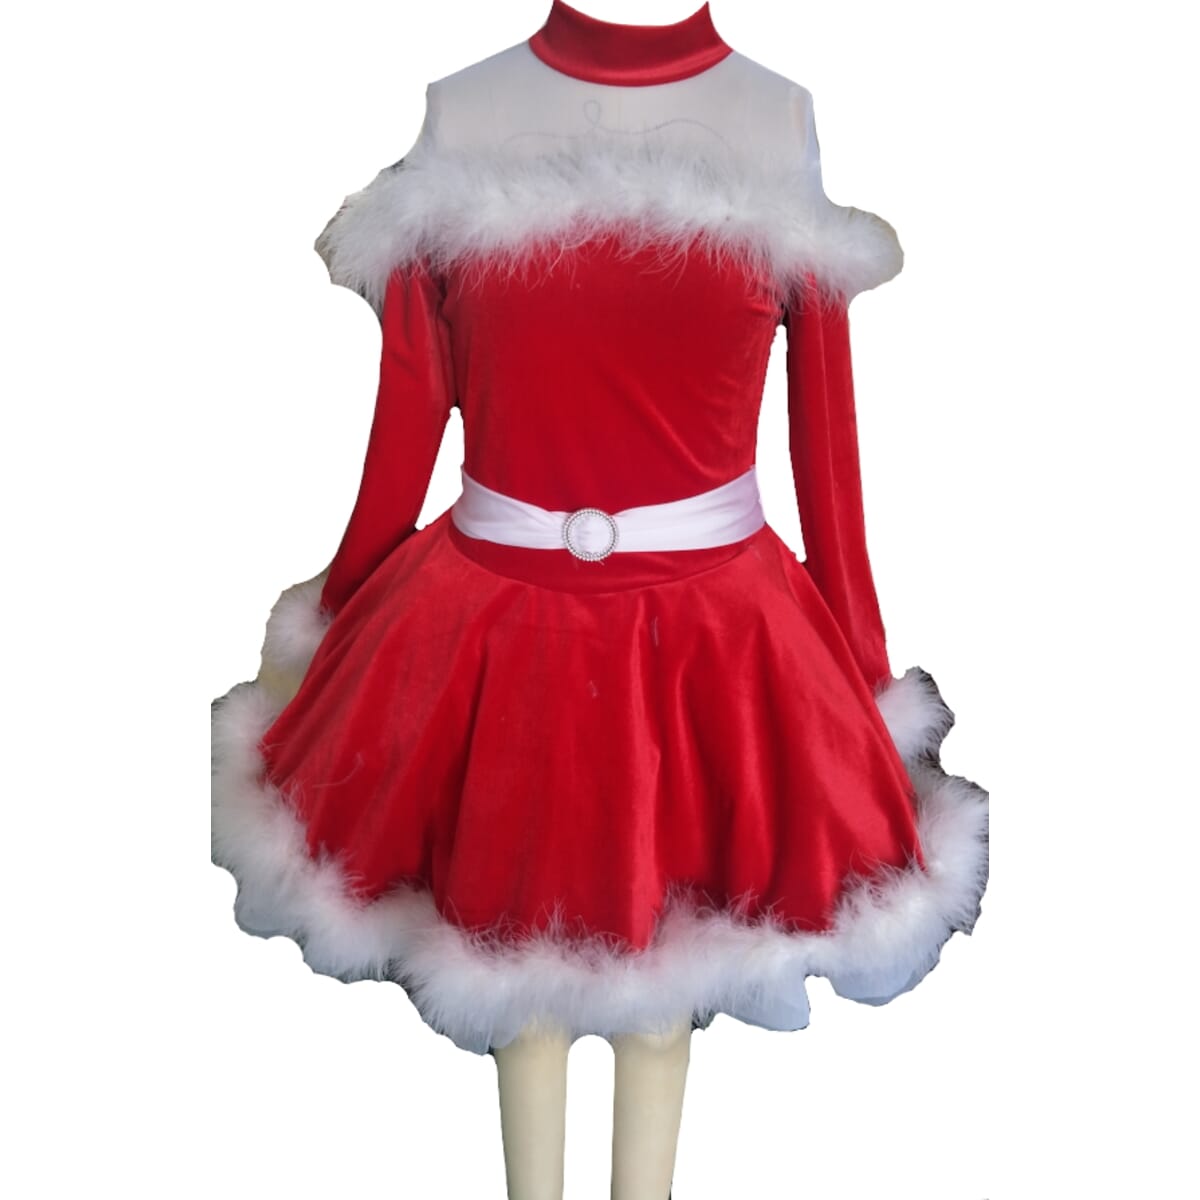 Hire Red Winter Fur from Costume Source | Ballet dance costume for hire